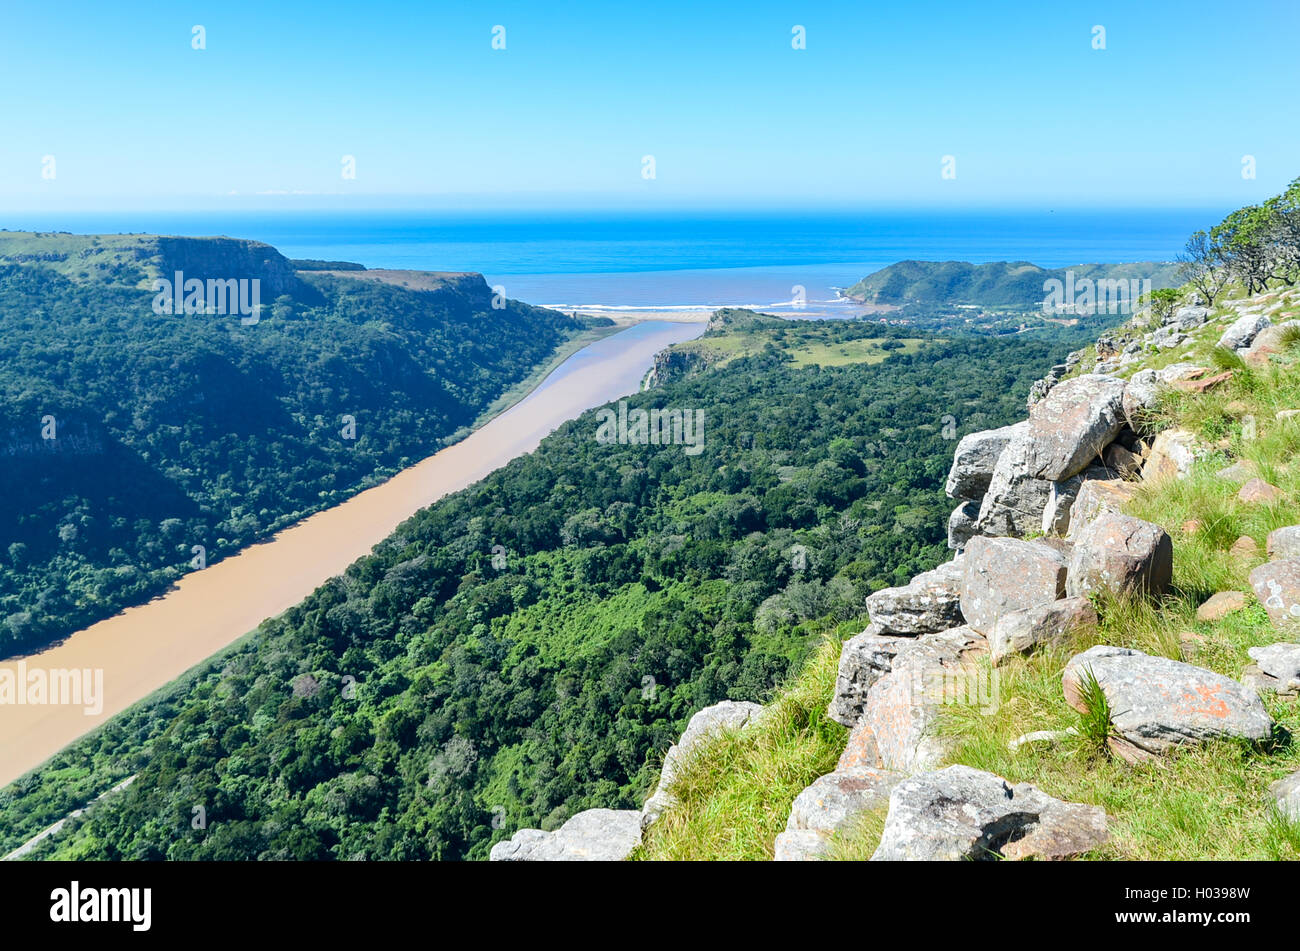 Aerial view of the the Umzimvubu river mouth in Port St Johns, Eastern Cape, South Africa Stock Photo